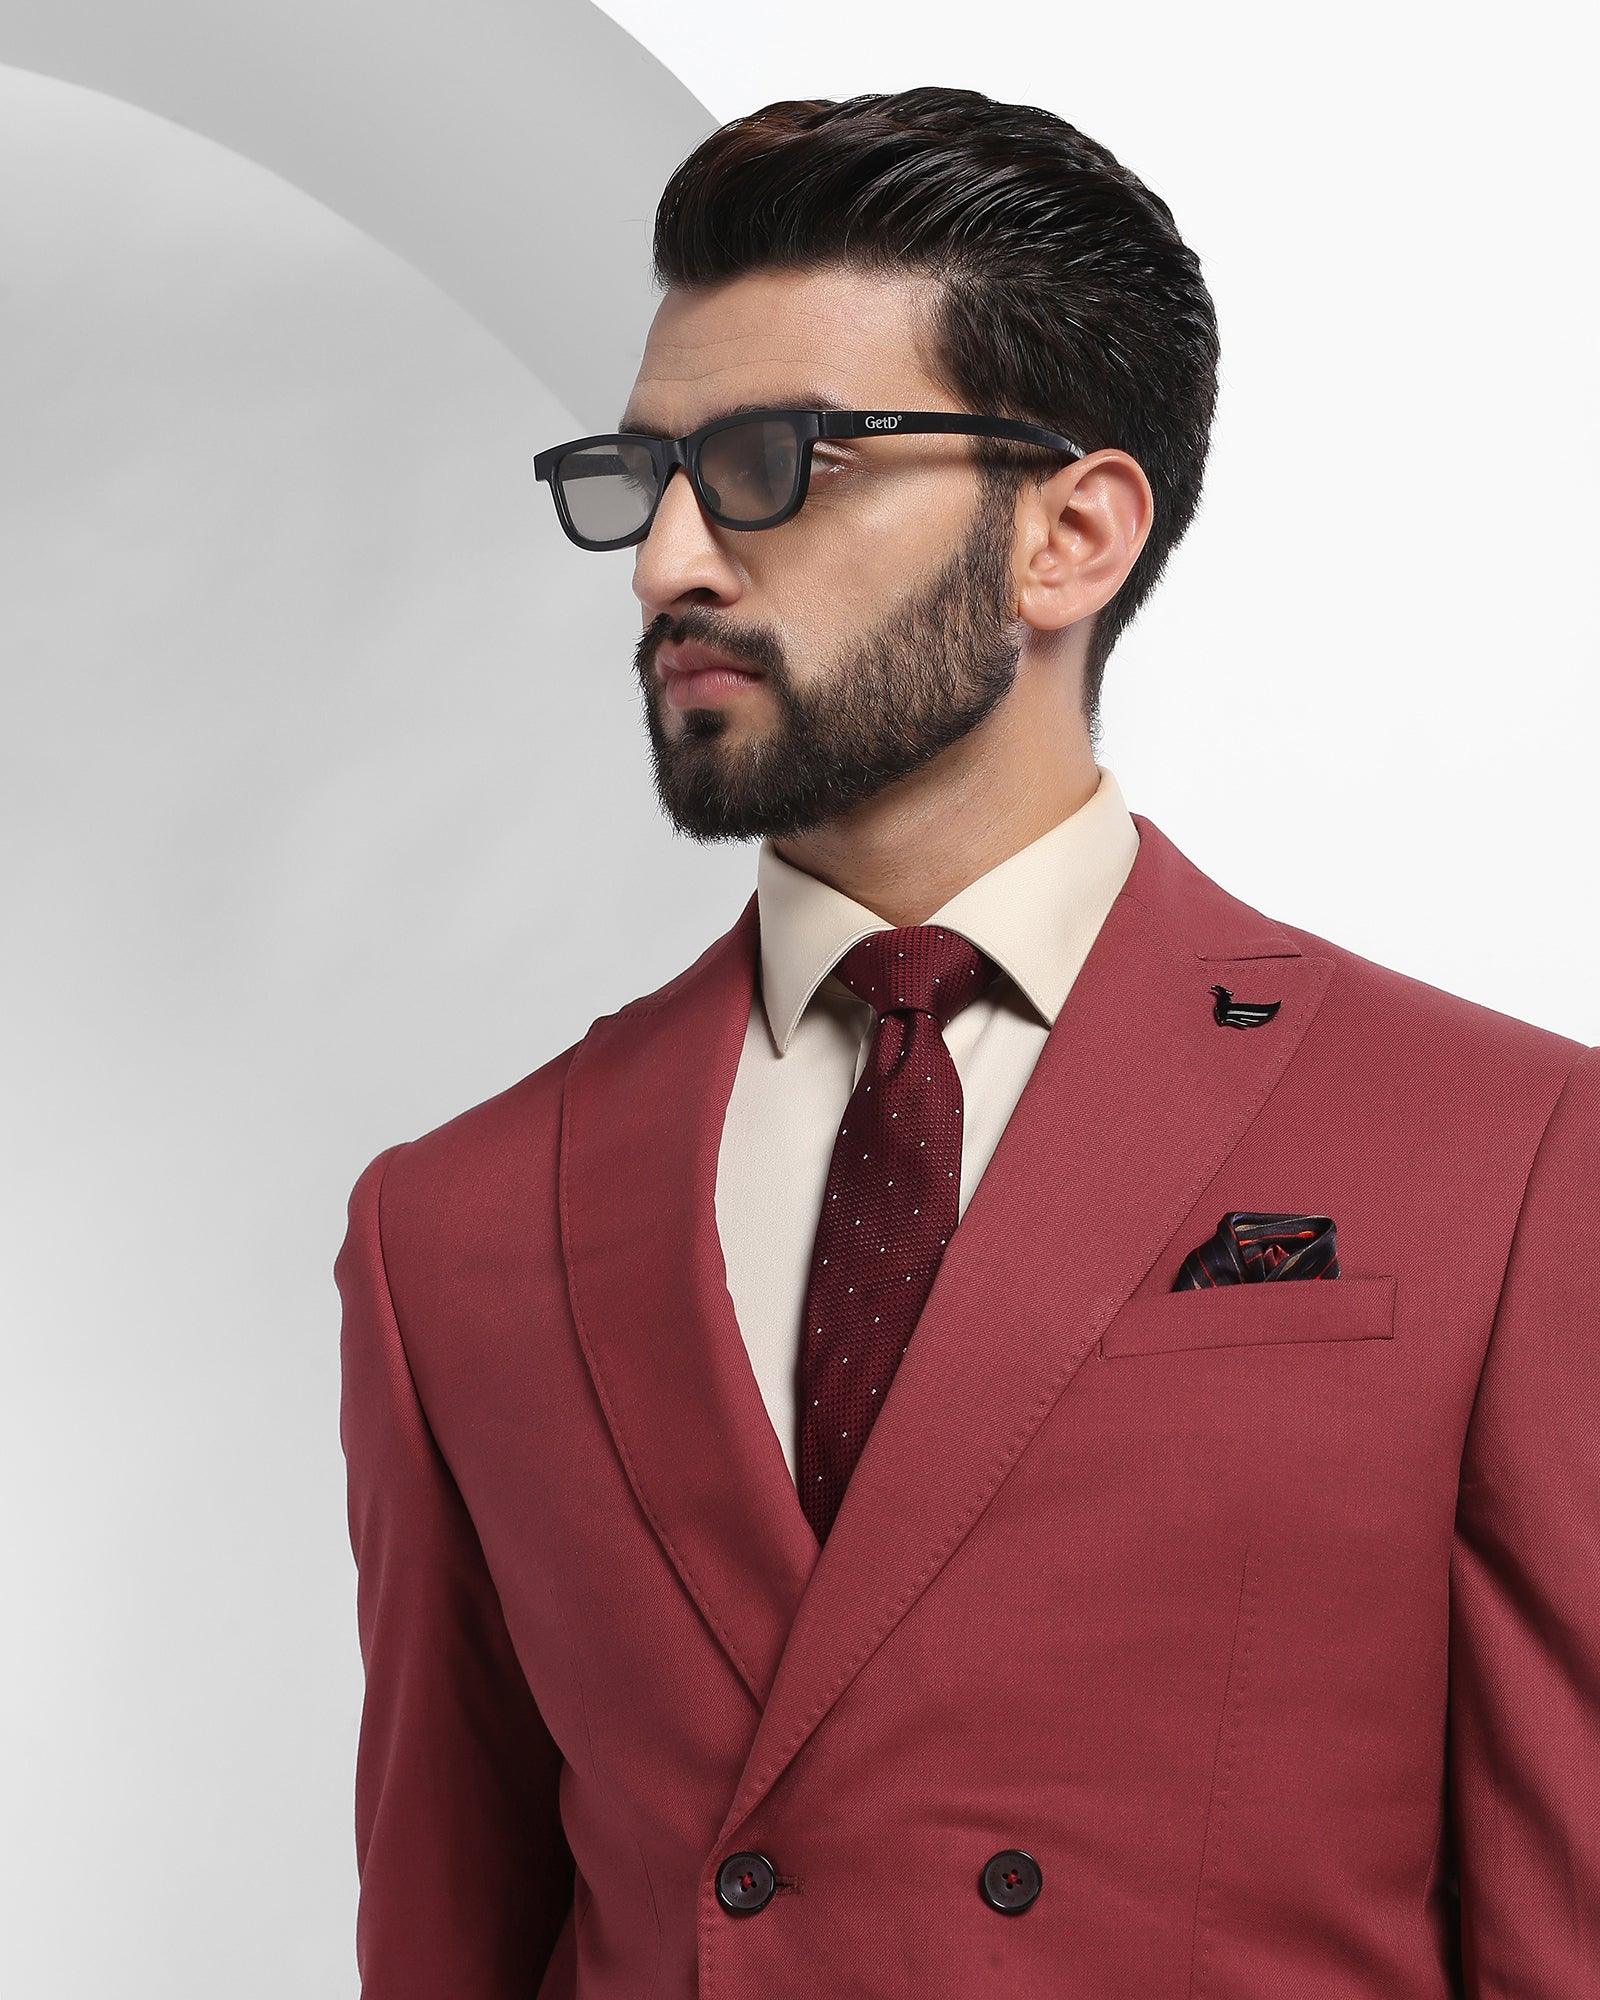 Double Breasted Two Piece Rust Solid Formal Suit - Elmund